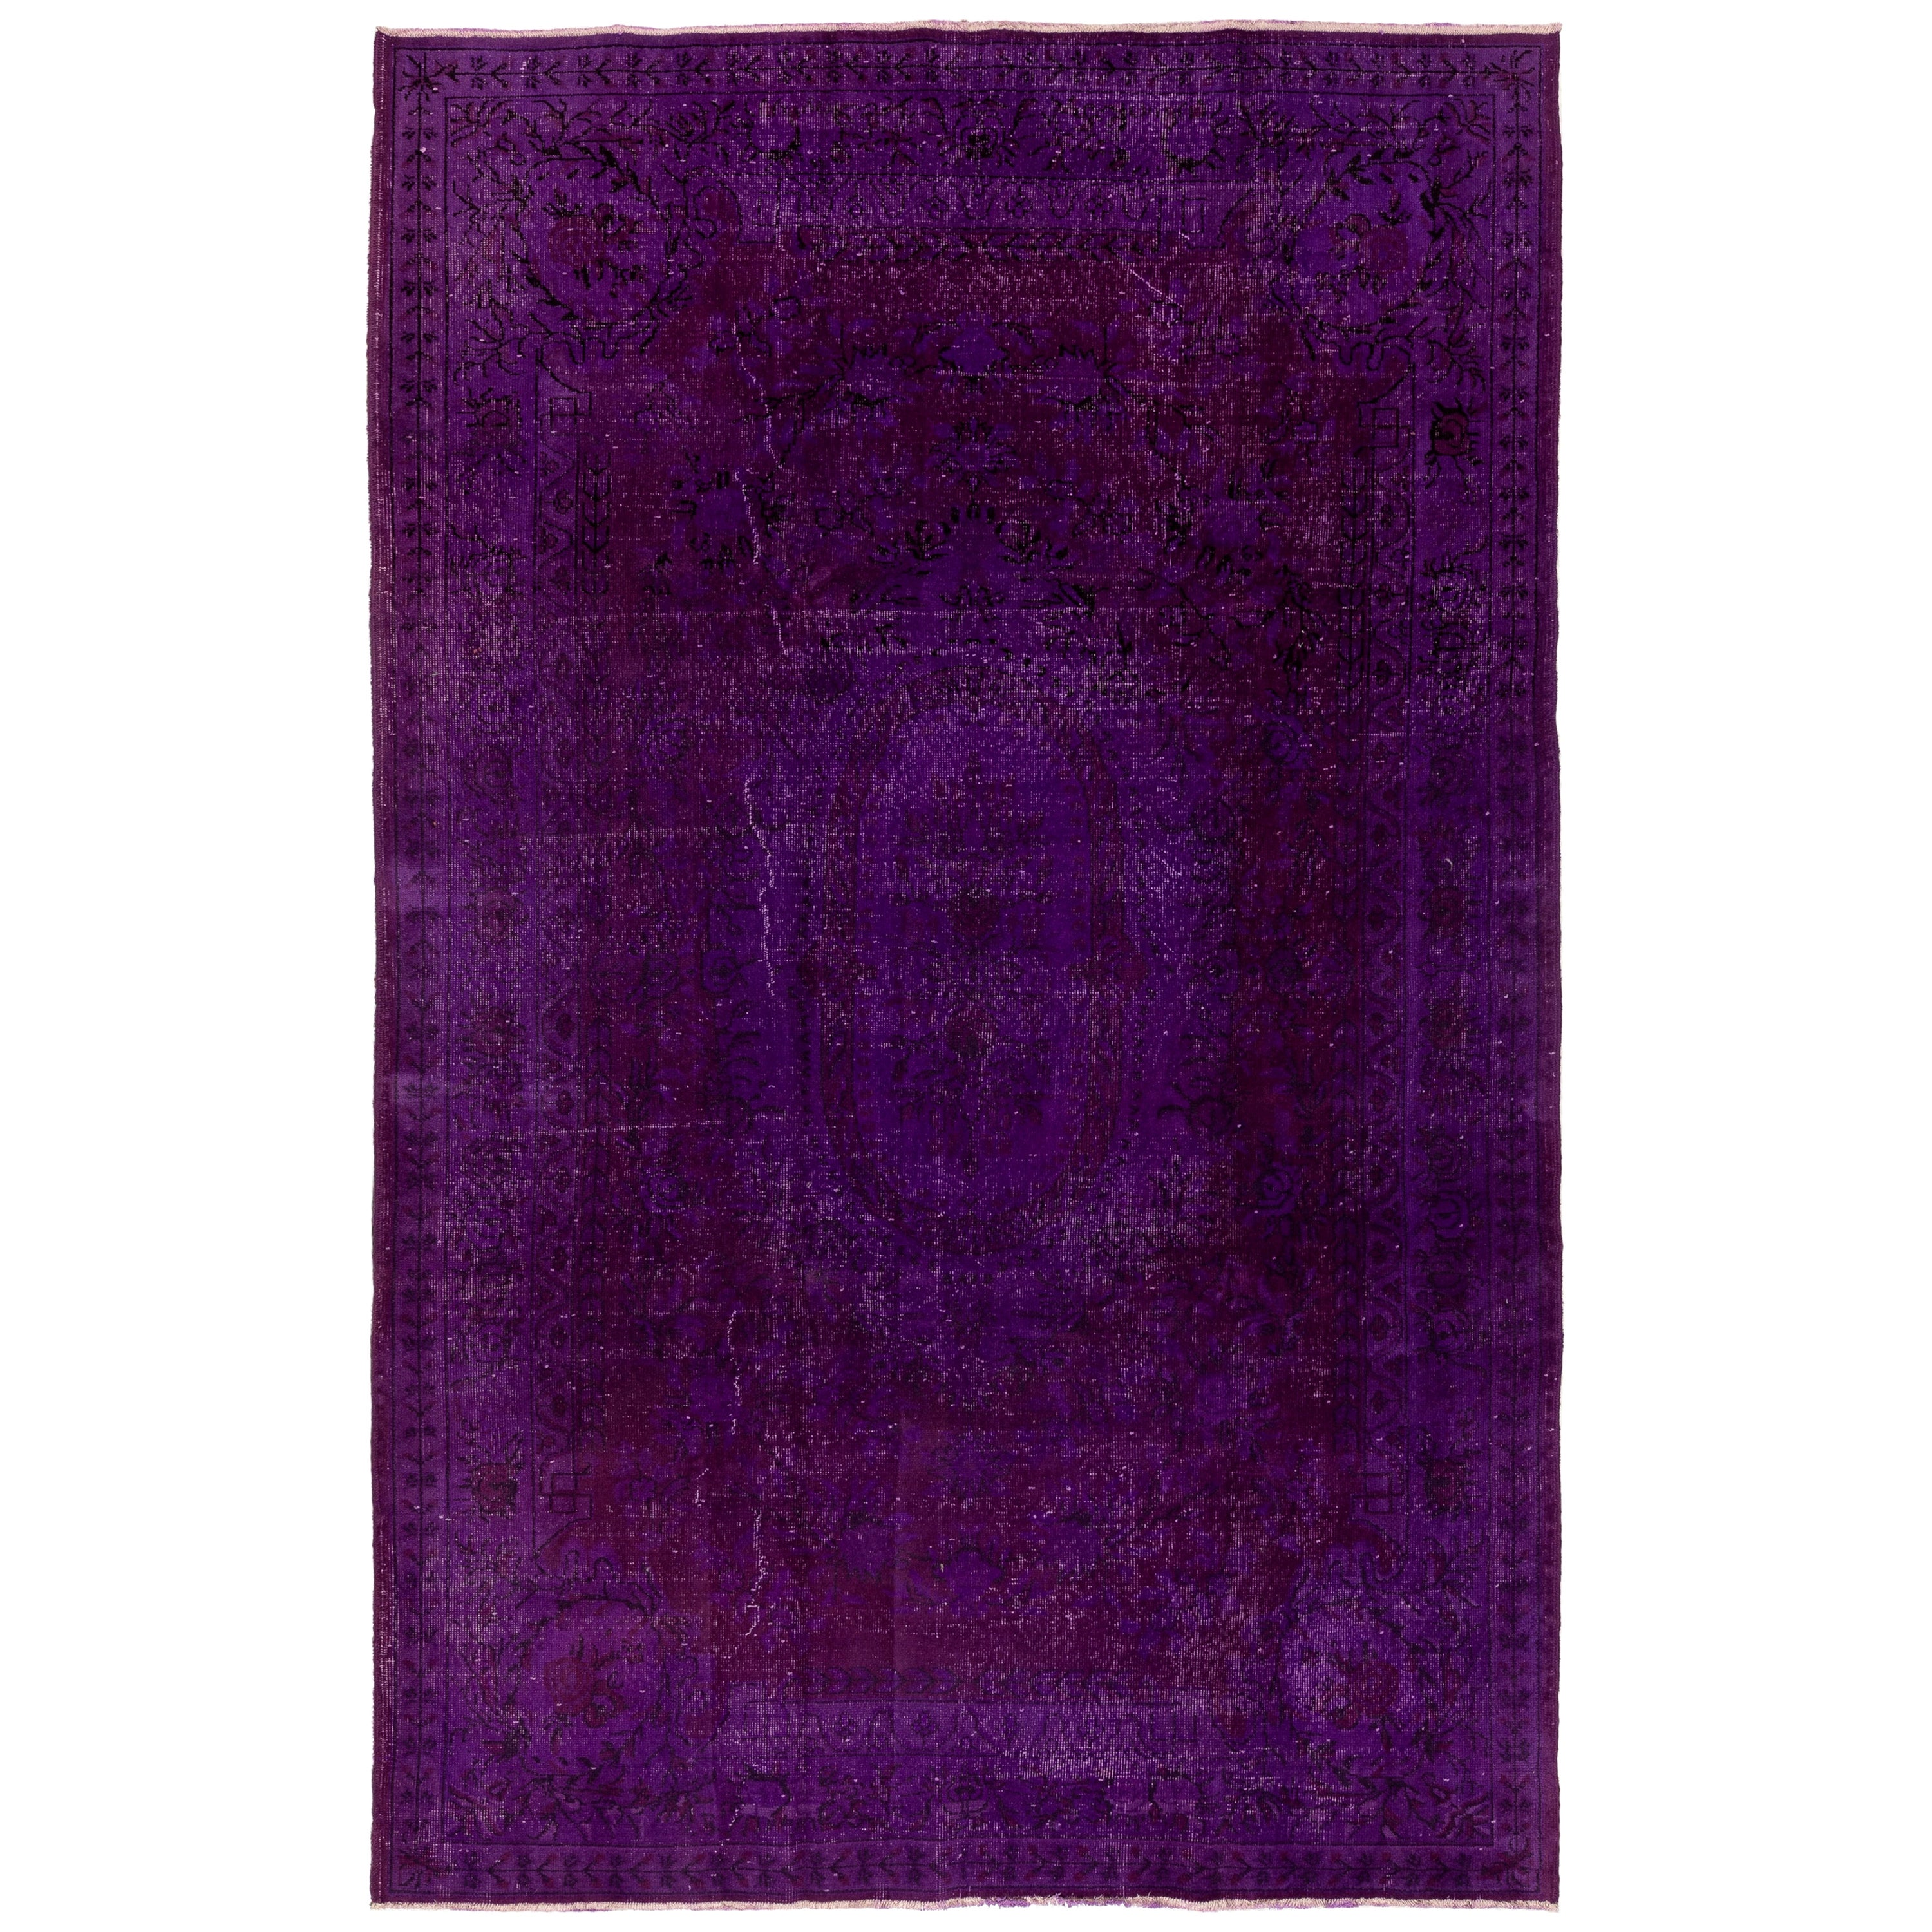 6.8x10 Ft Handmade Turkish Area Rug in Purple. Ideal for Contemporary Interiors For Sale